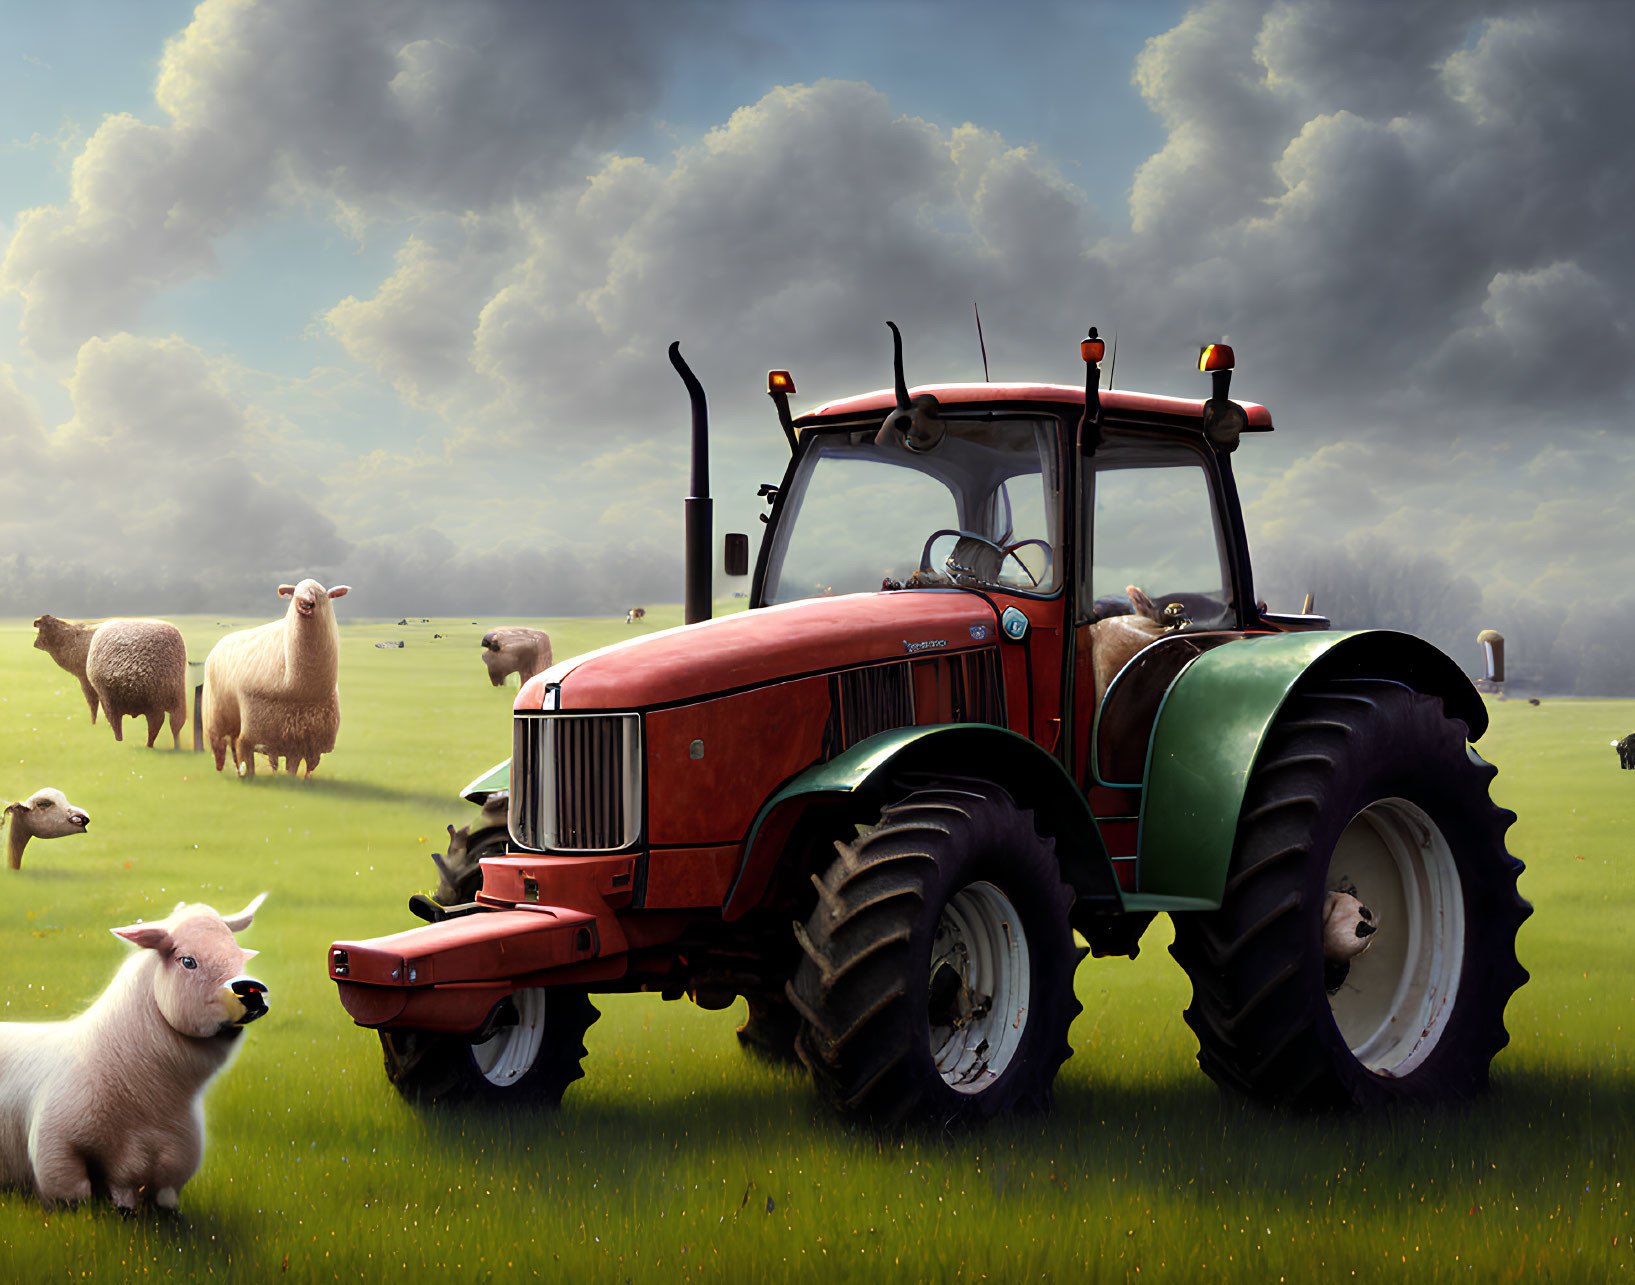 Red and Green Tractor with Sheep on Grassy Field under Cloudy Sky